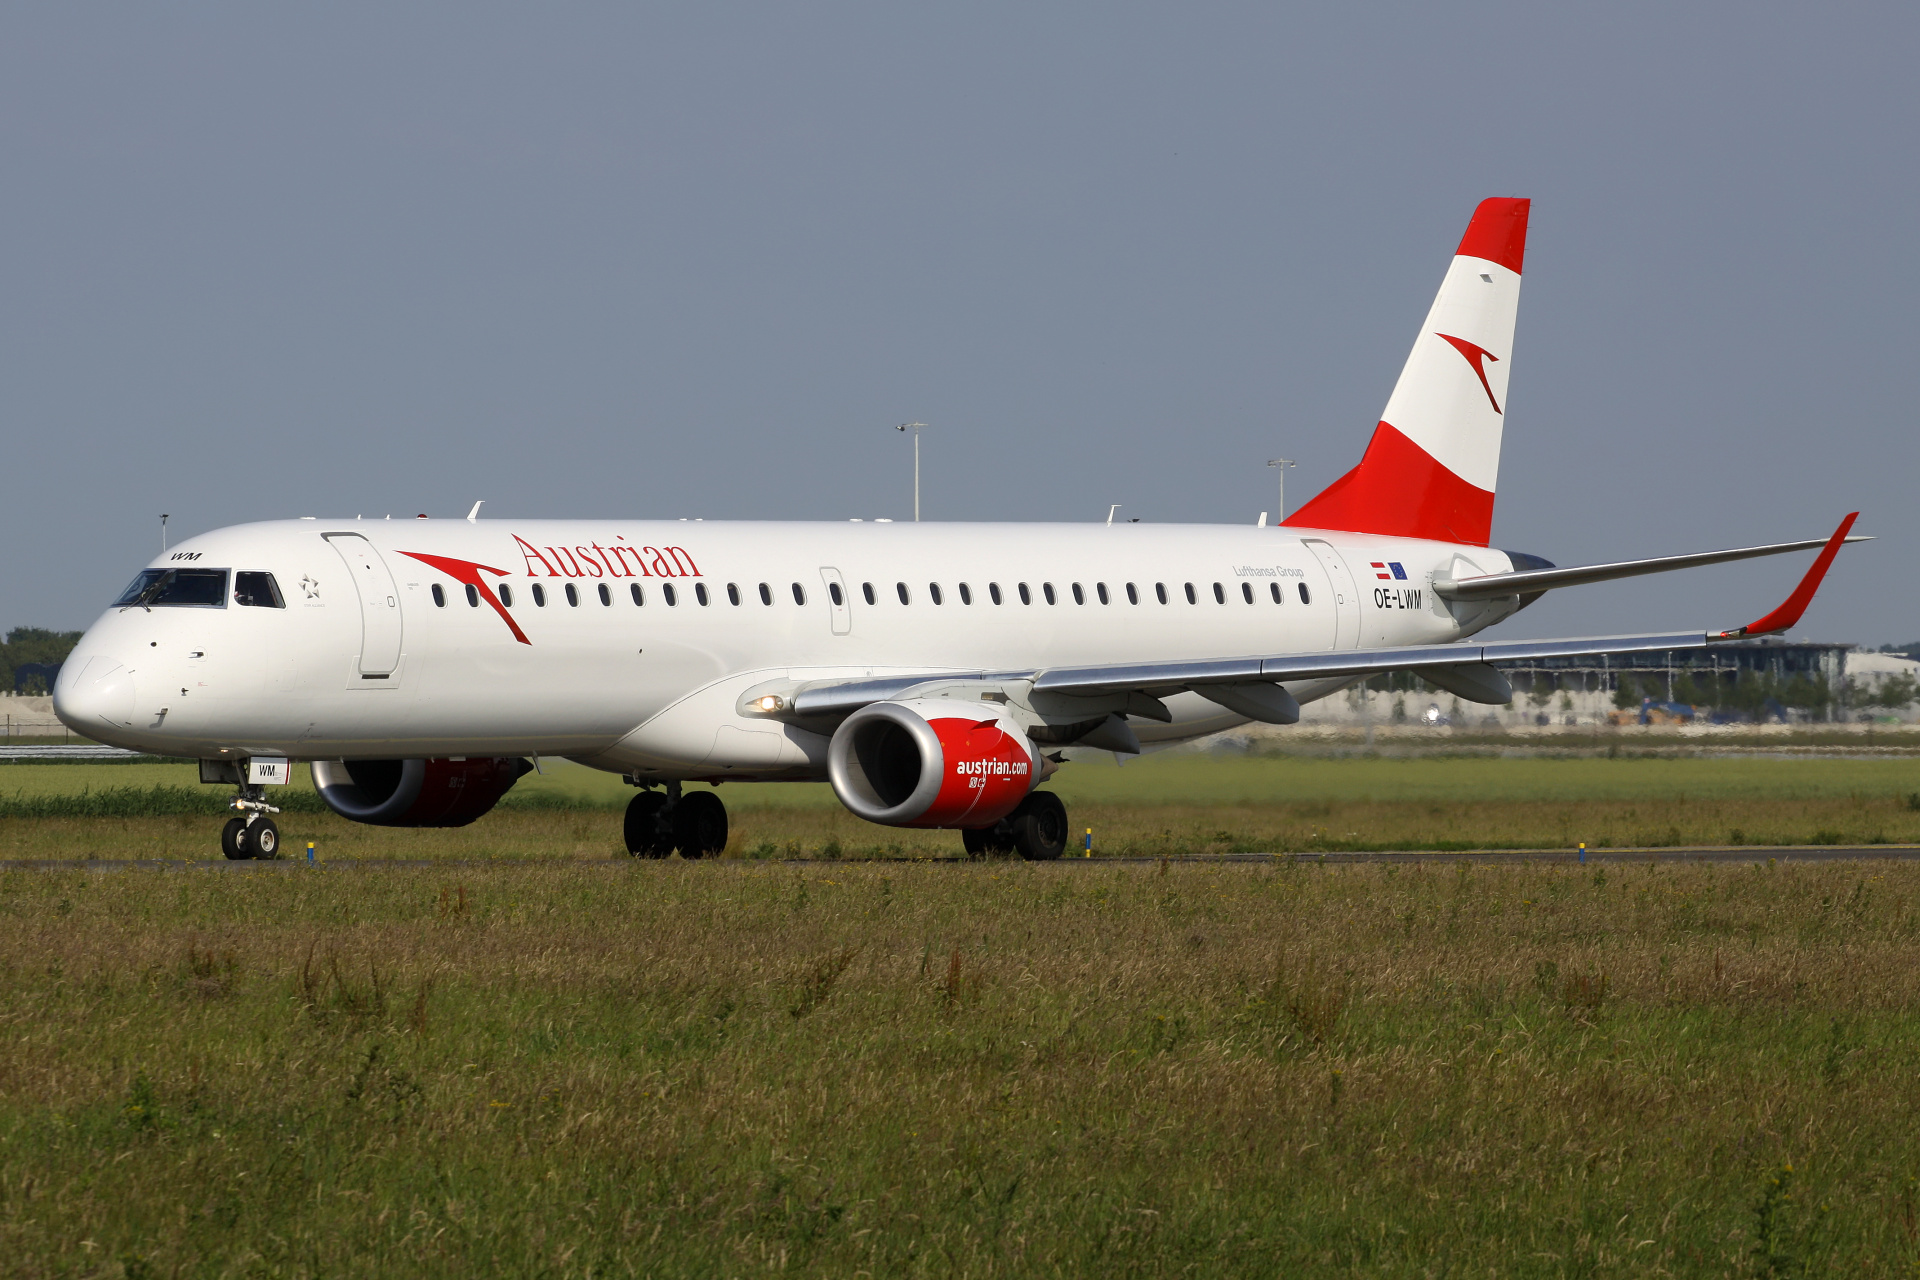 OE-LWM, Austrian Airlines (Aircraft » Schiphol Spotting » Embraer E195)